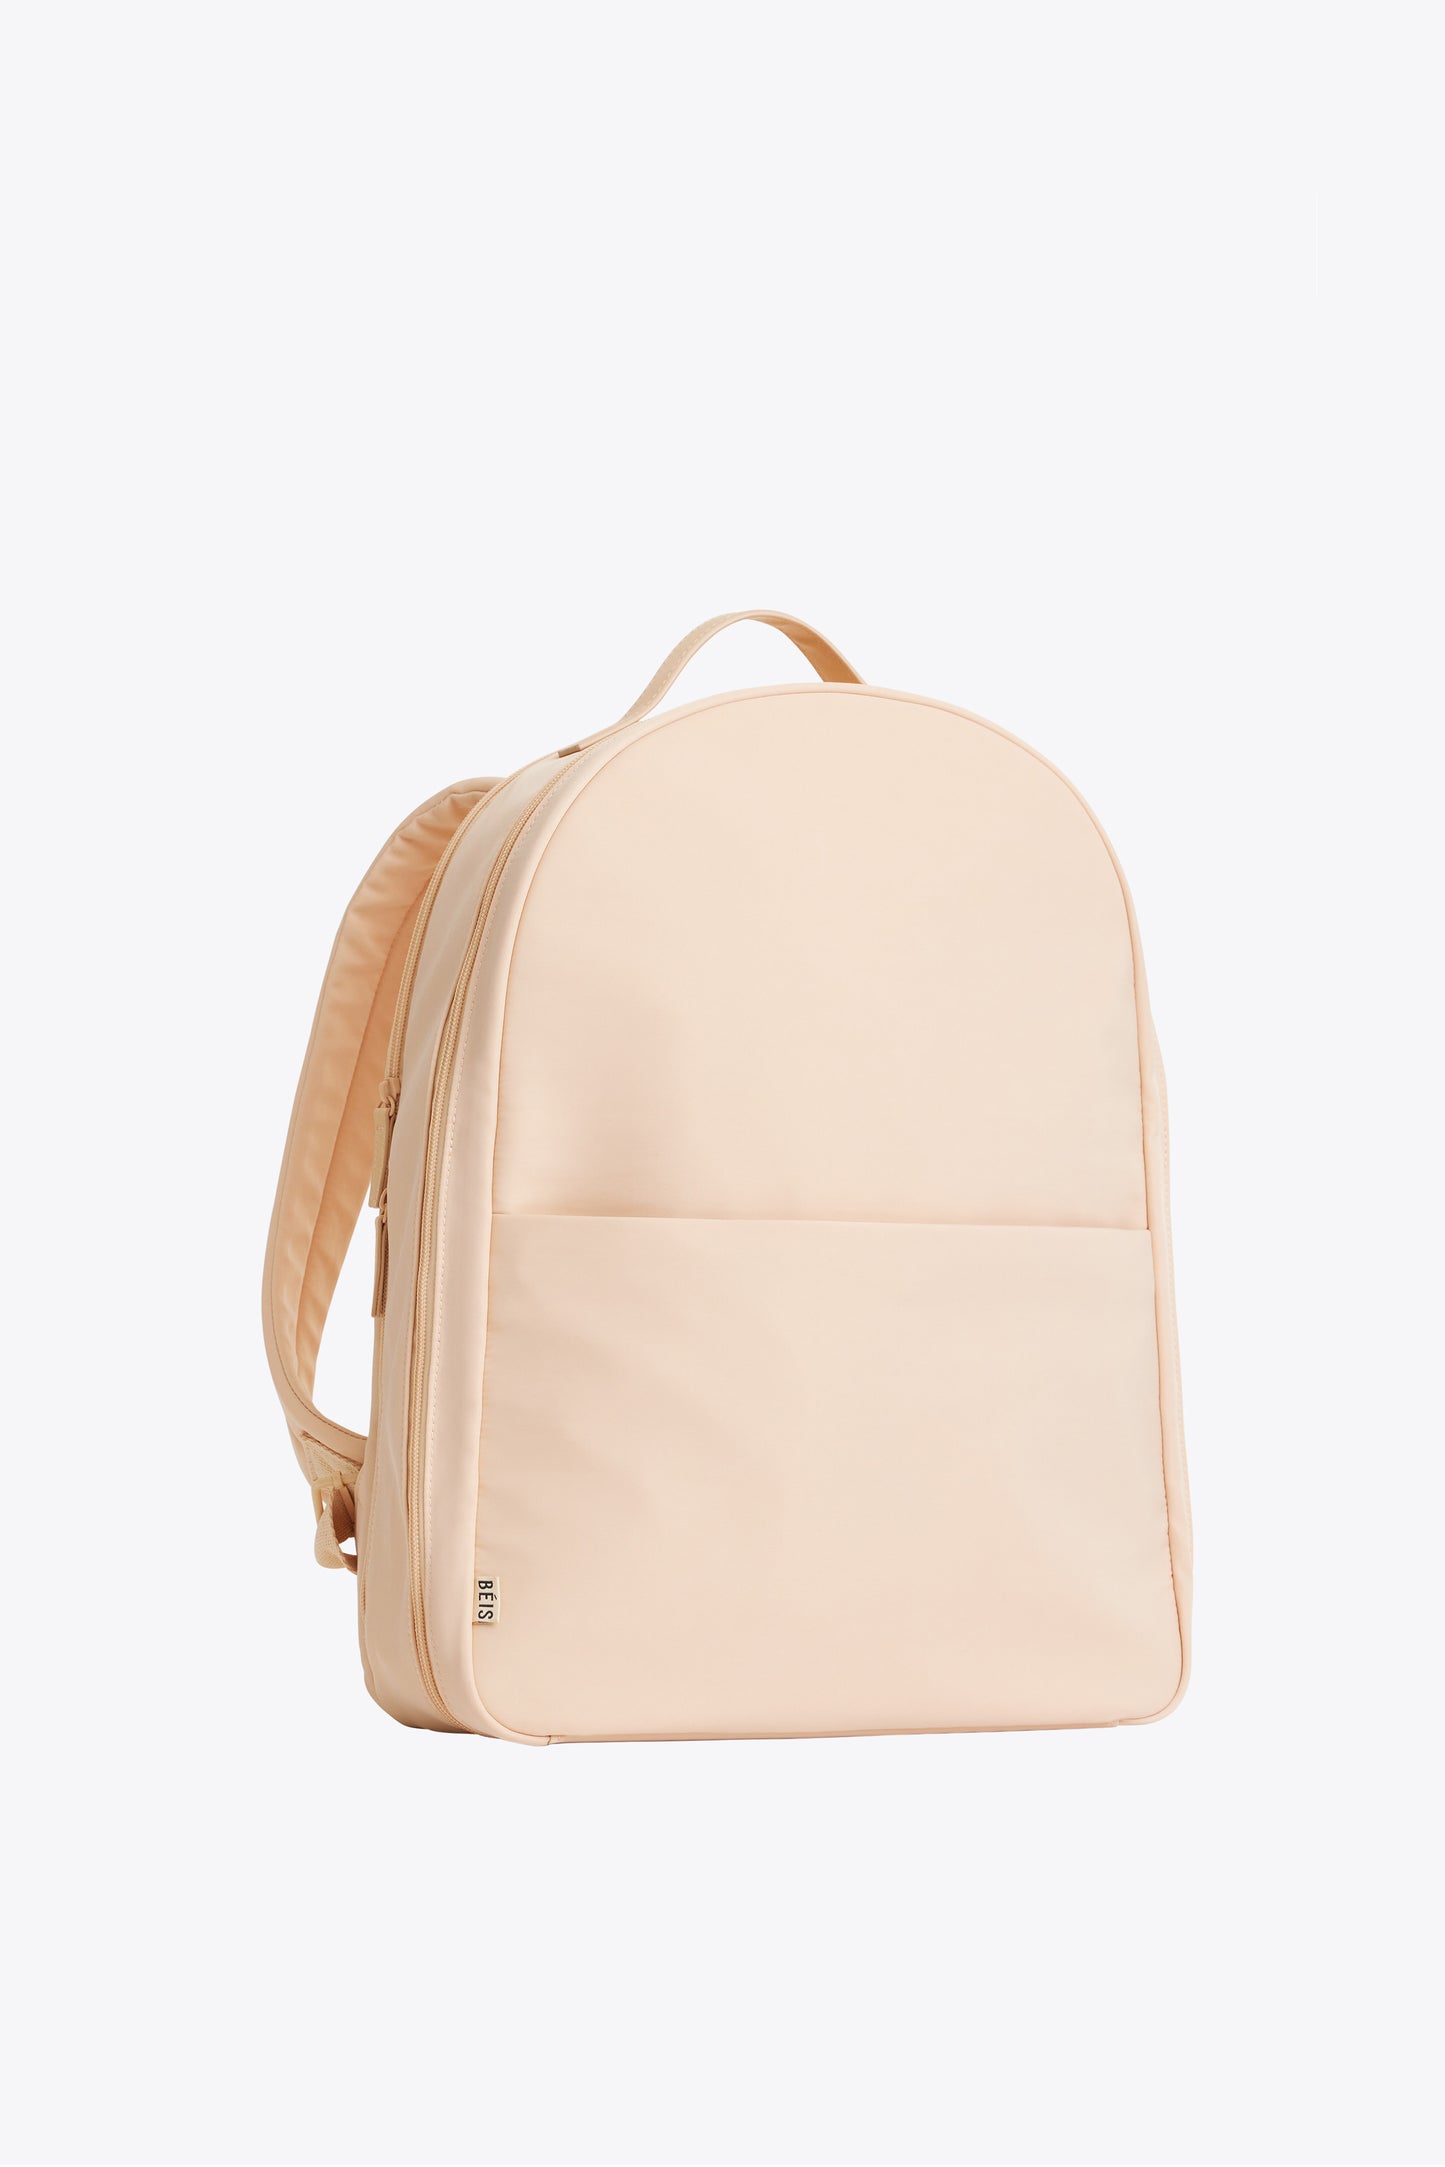 The Commuter Backpack in Beige